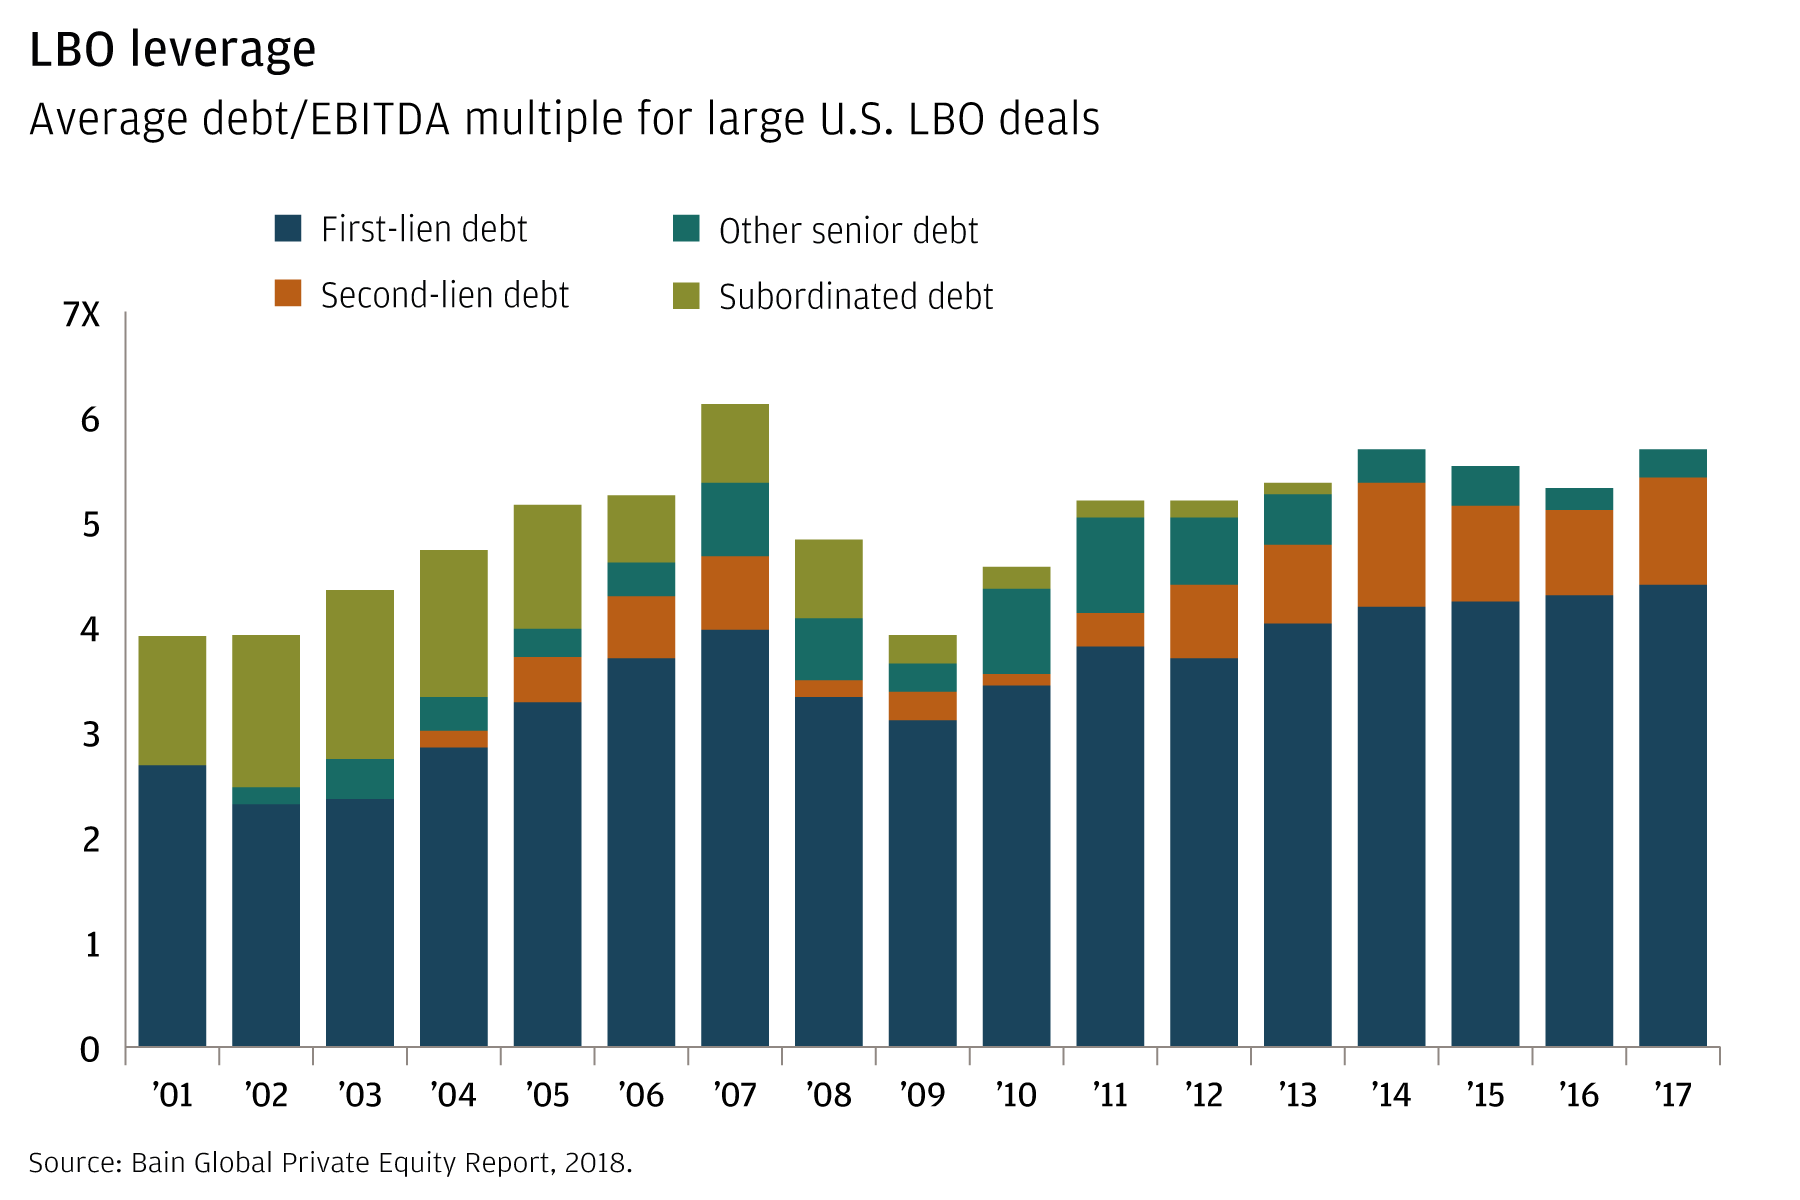 Bar chart showing average debt/EBITDA multiples and debt structure for large LBO deals by year, 2001–2017